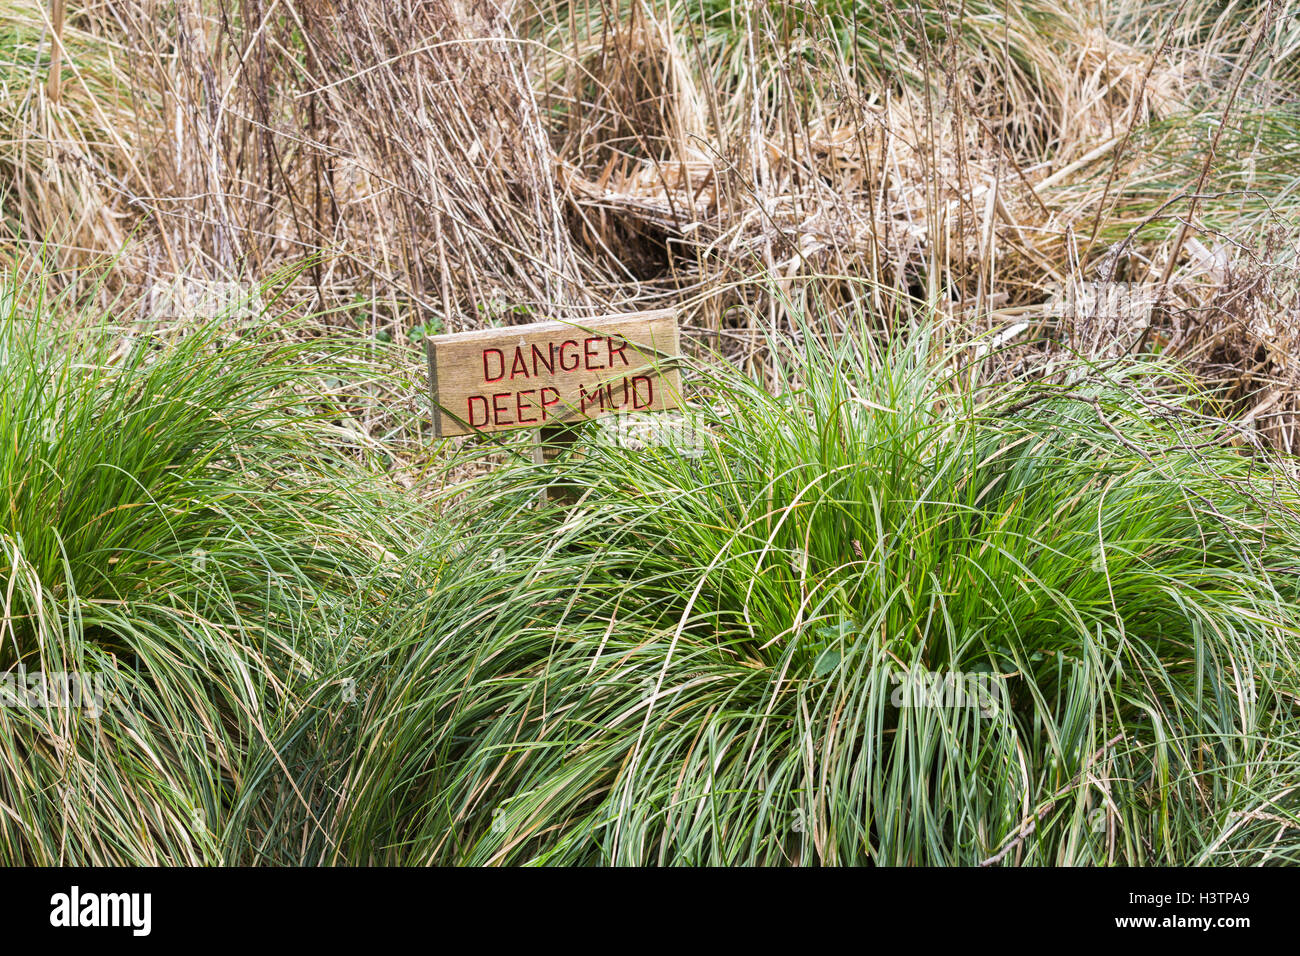 Rectangular wooden sign with red writing in marshy ground, Danger Deep Mud Stock Photo